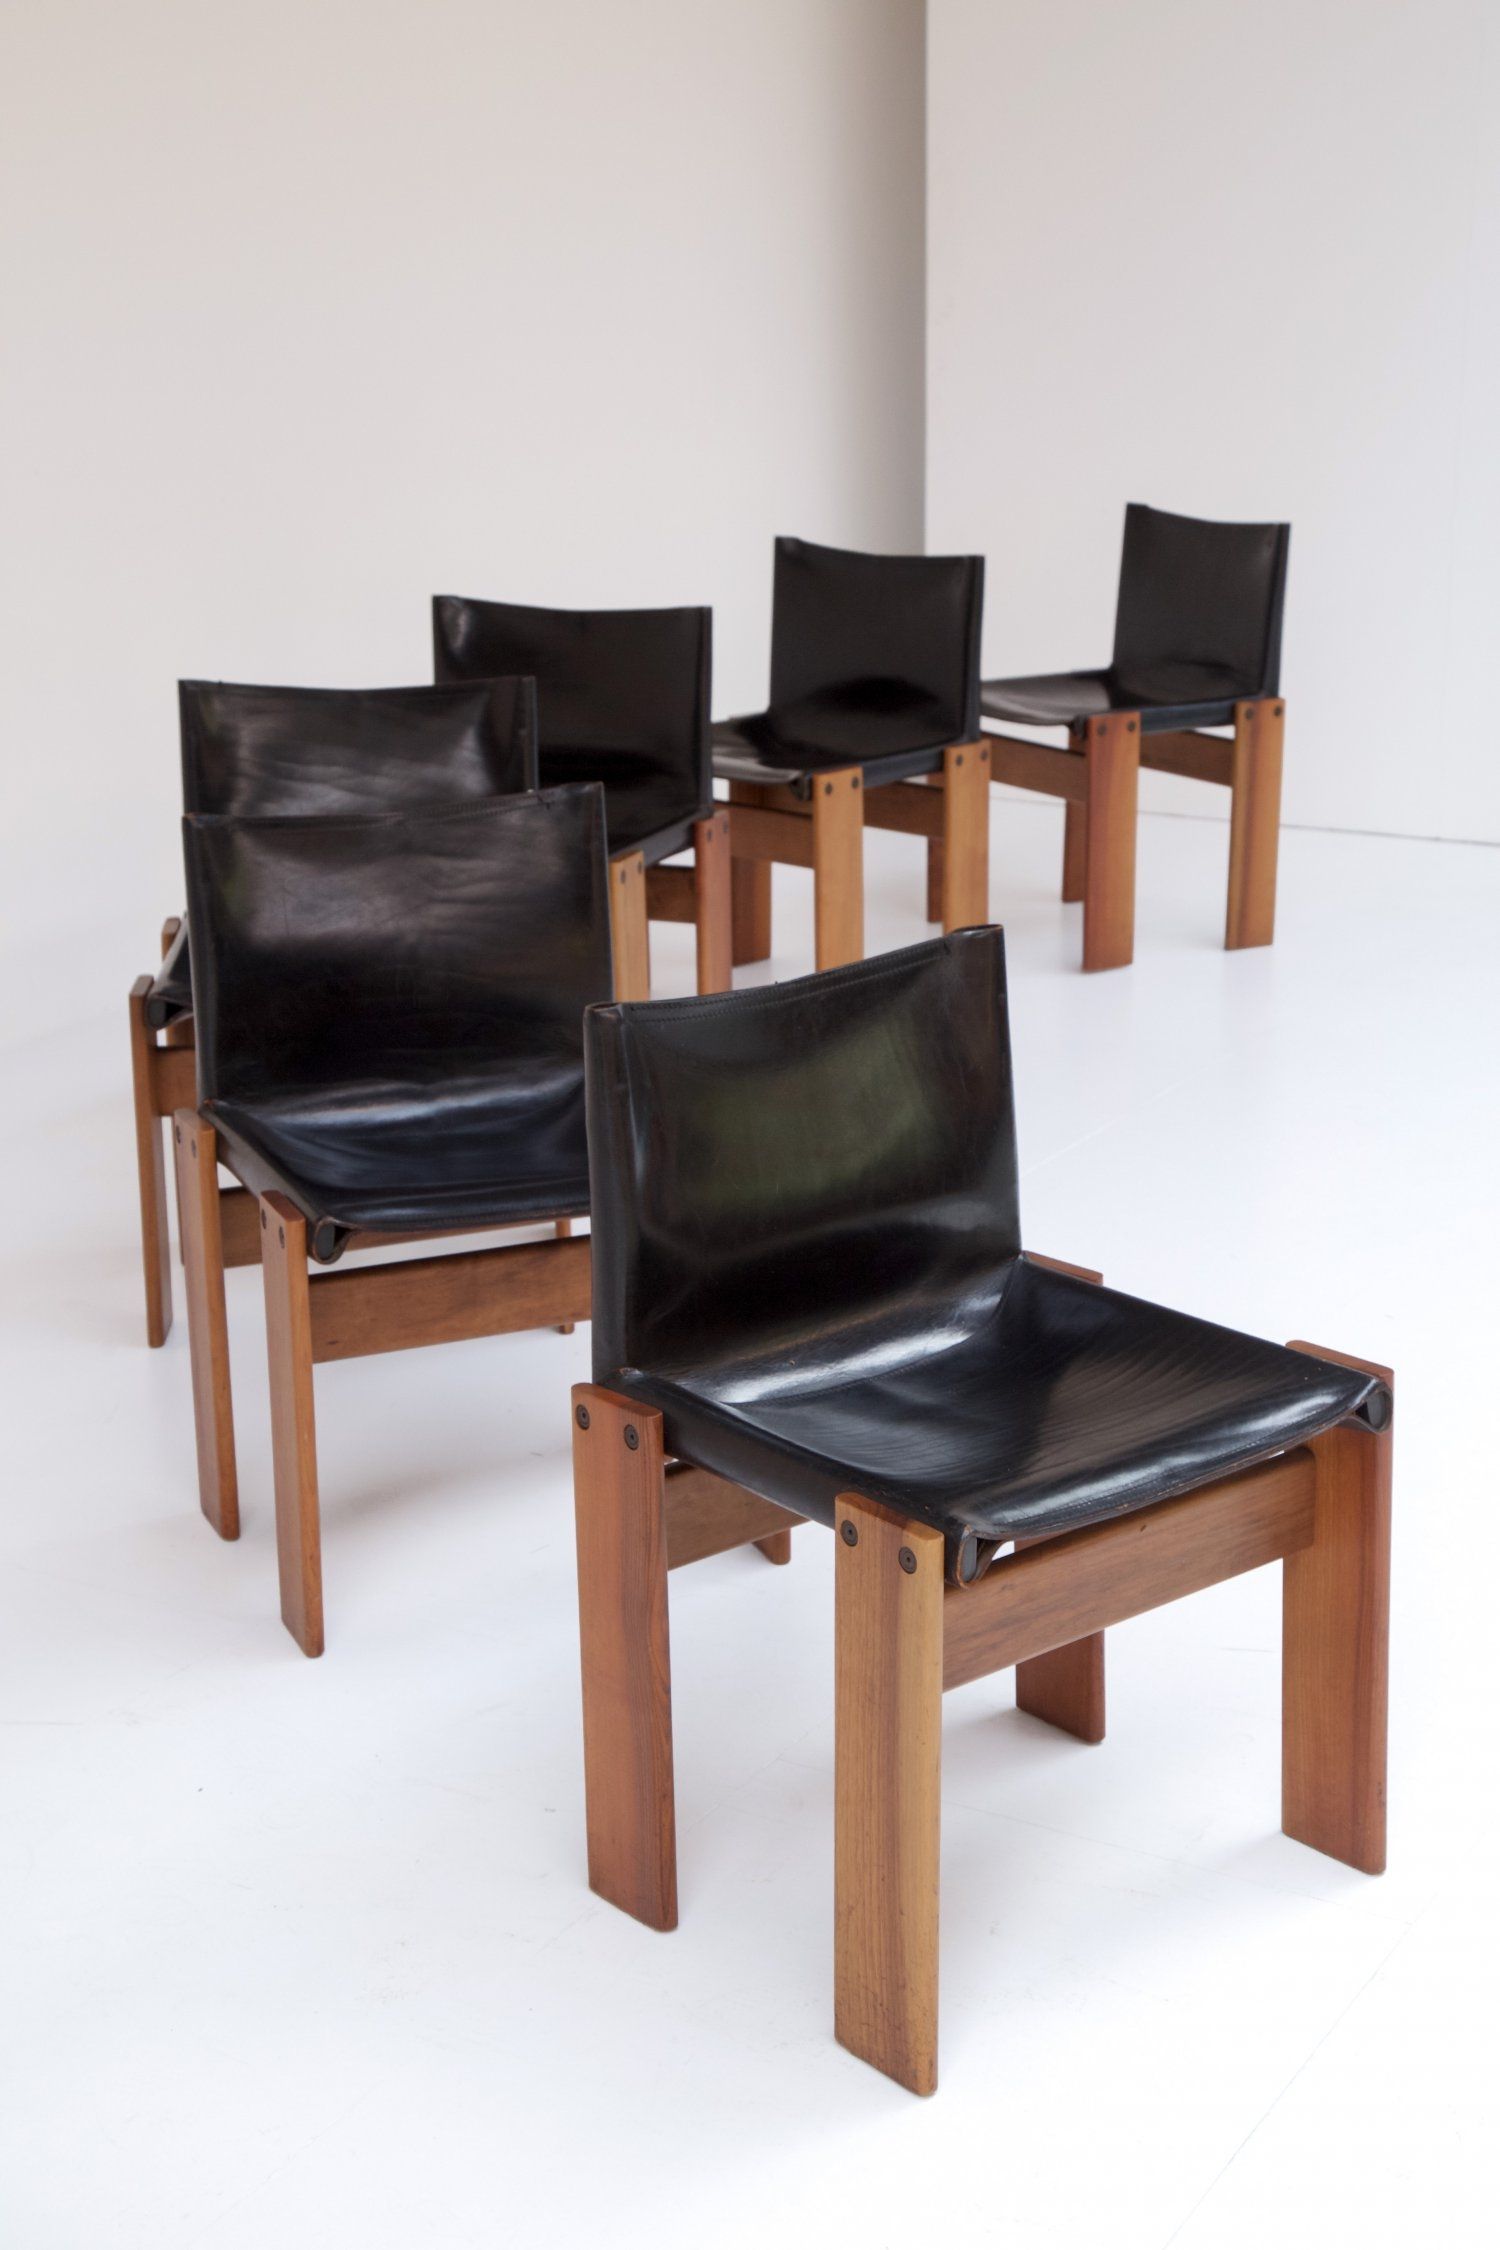 Monk Chairs Afra Tobia Scarpa Vanlandschoote With Monk Chairs (View 14 of 15)